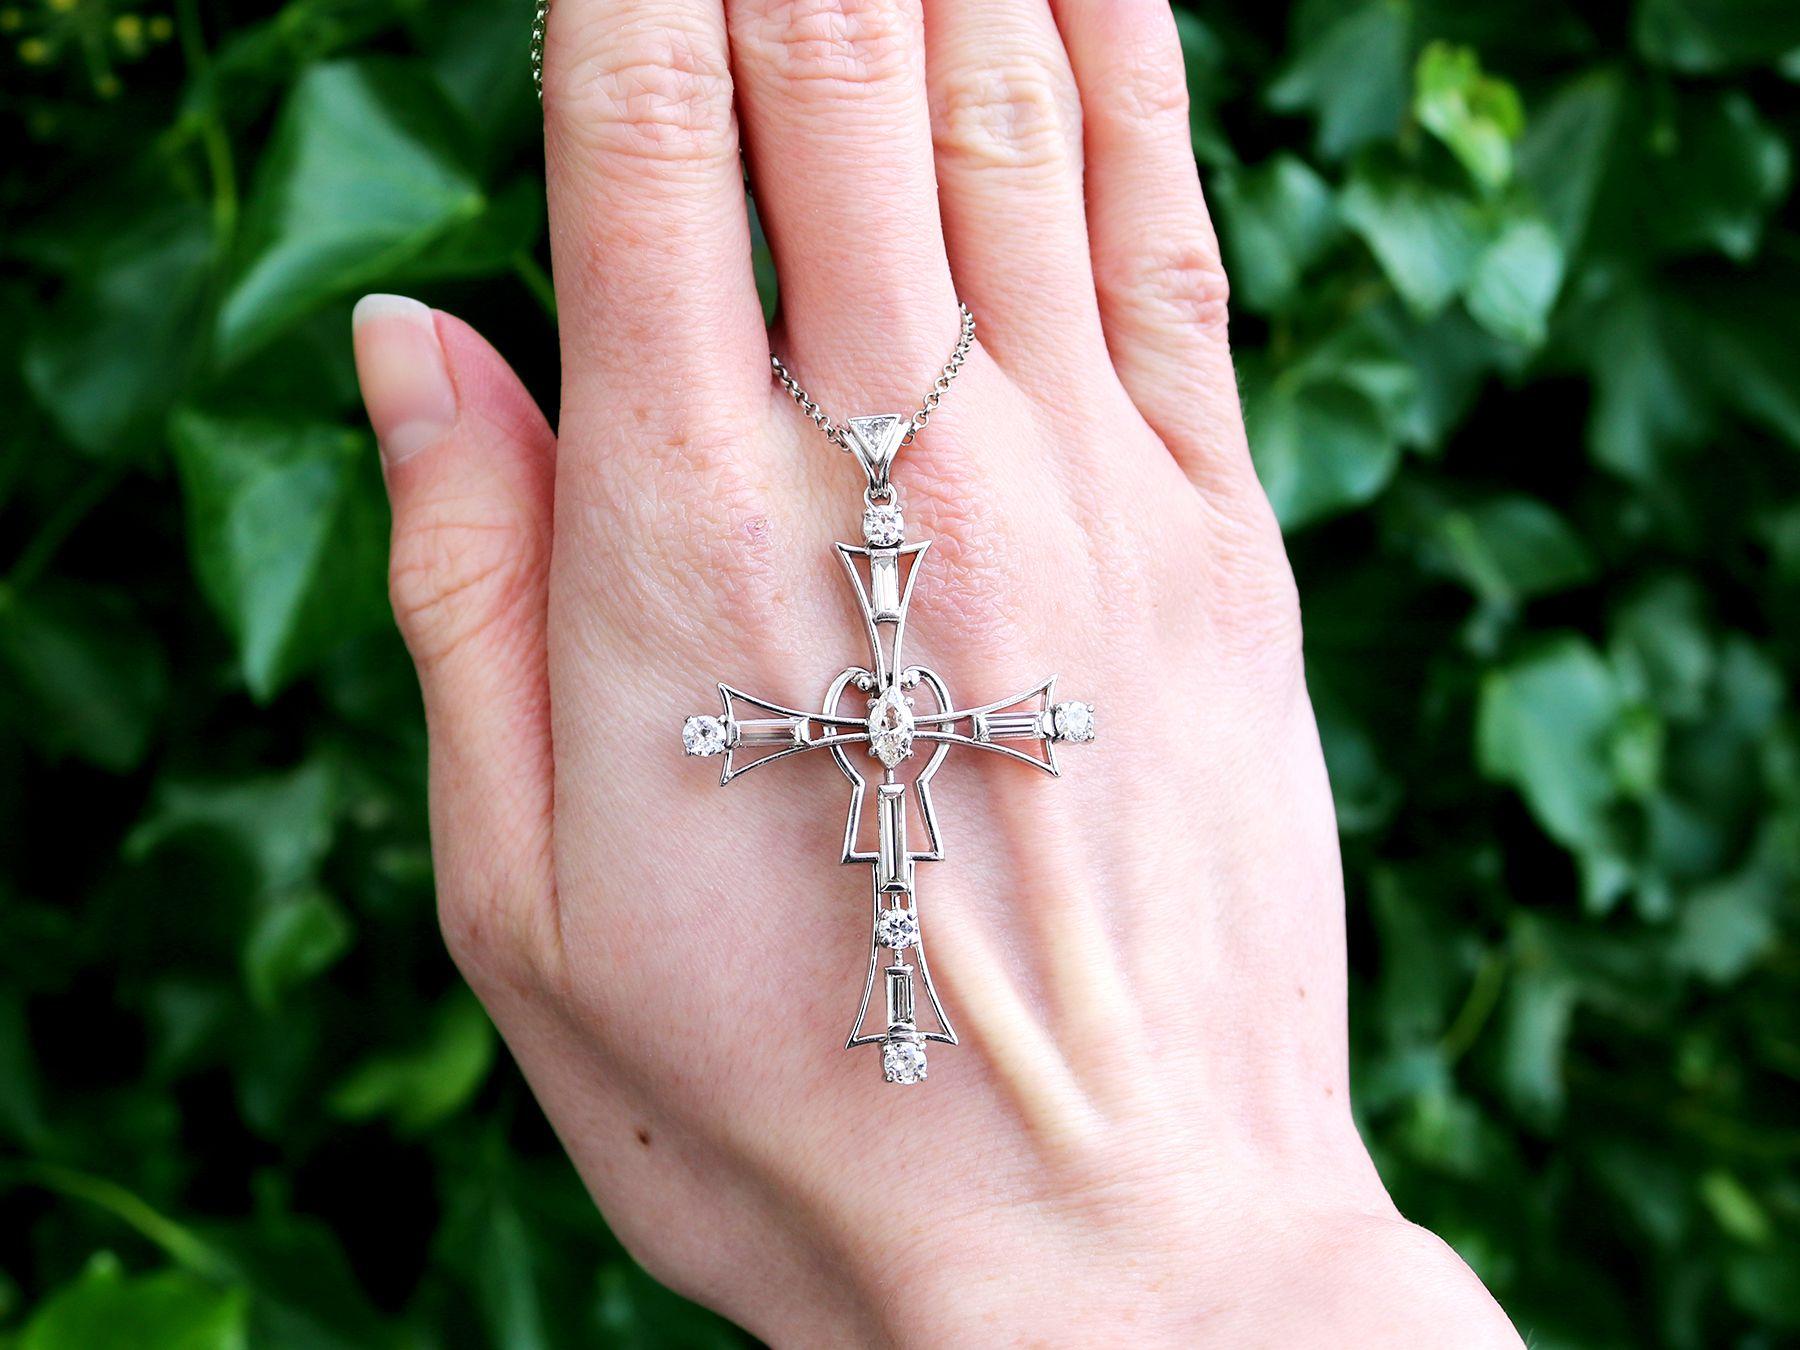 A stunning, fine and impressive antique 1930s 1.93 carat diamond and platinum cross pendant; part of our diverse antique jewelry and estate jewelry collections

This stunning, fine and impressive antique diamond pendant has been crafted in